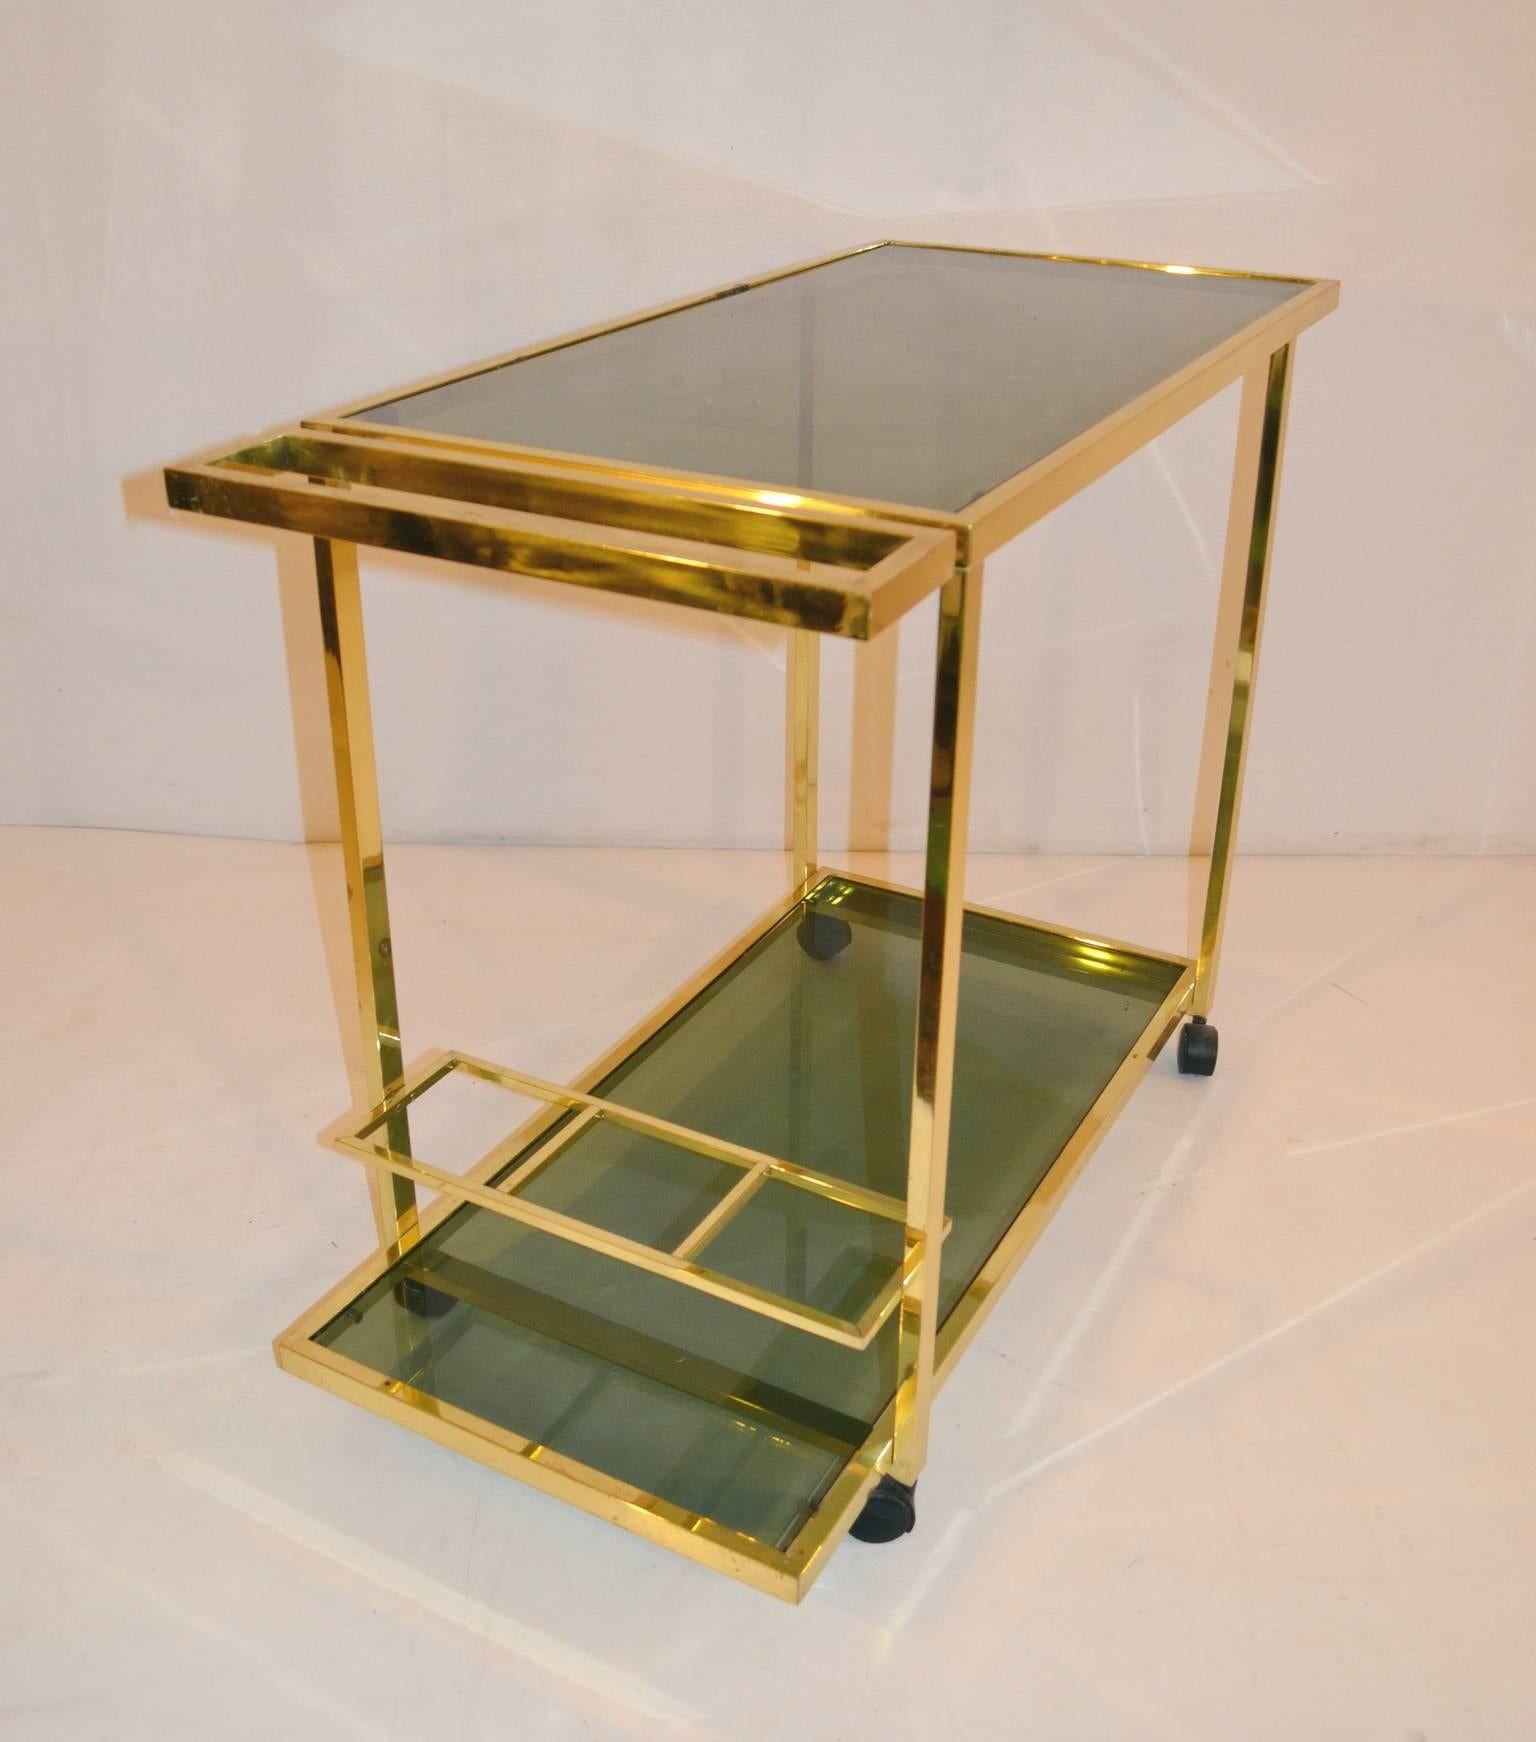 Elegant two tiered bar cart with bottle holder in brass and smoked glass.